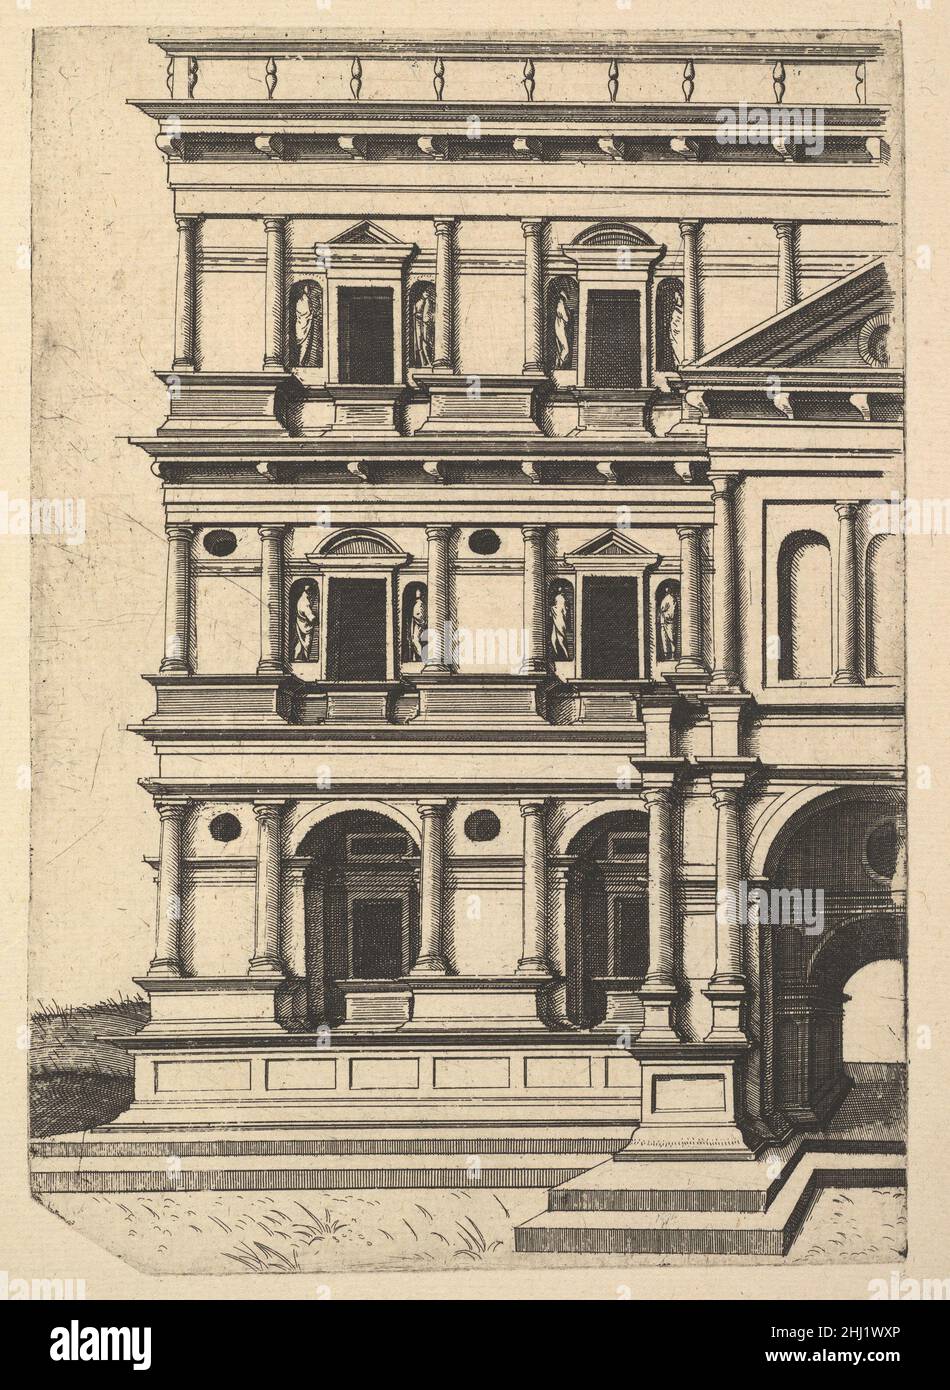 Partial View of a Building [Palatium Claudie] from the series 'Ruinarum variarum fabricarum delineationes pictoribus caeterisque id genus artificibus multum utiles' 1554 Lambert Suavius Netherlandish Perspectival view of the leftt side of a building described as the palace of Emperor Claudius. The building consists of three stories crowned by a balustrade and three bays of what is likely a five-bay façade have been depicted. The bay on the right (the central bay of the façade) shows the entrance way, marked by an avant-corpse with its own attica and a pediment. It is not clear whether this ren Stock Photo